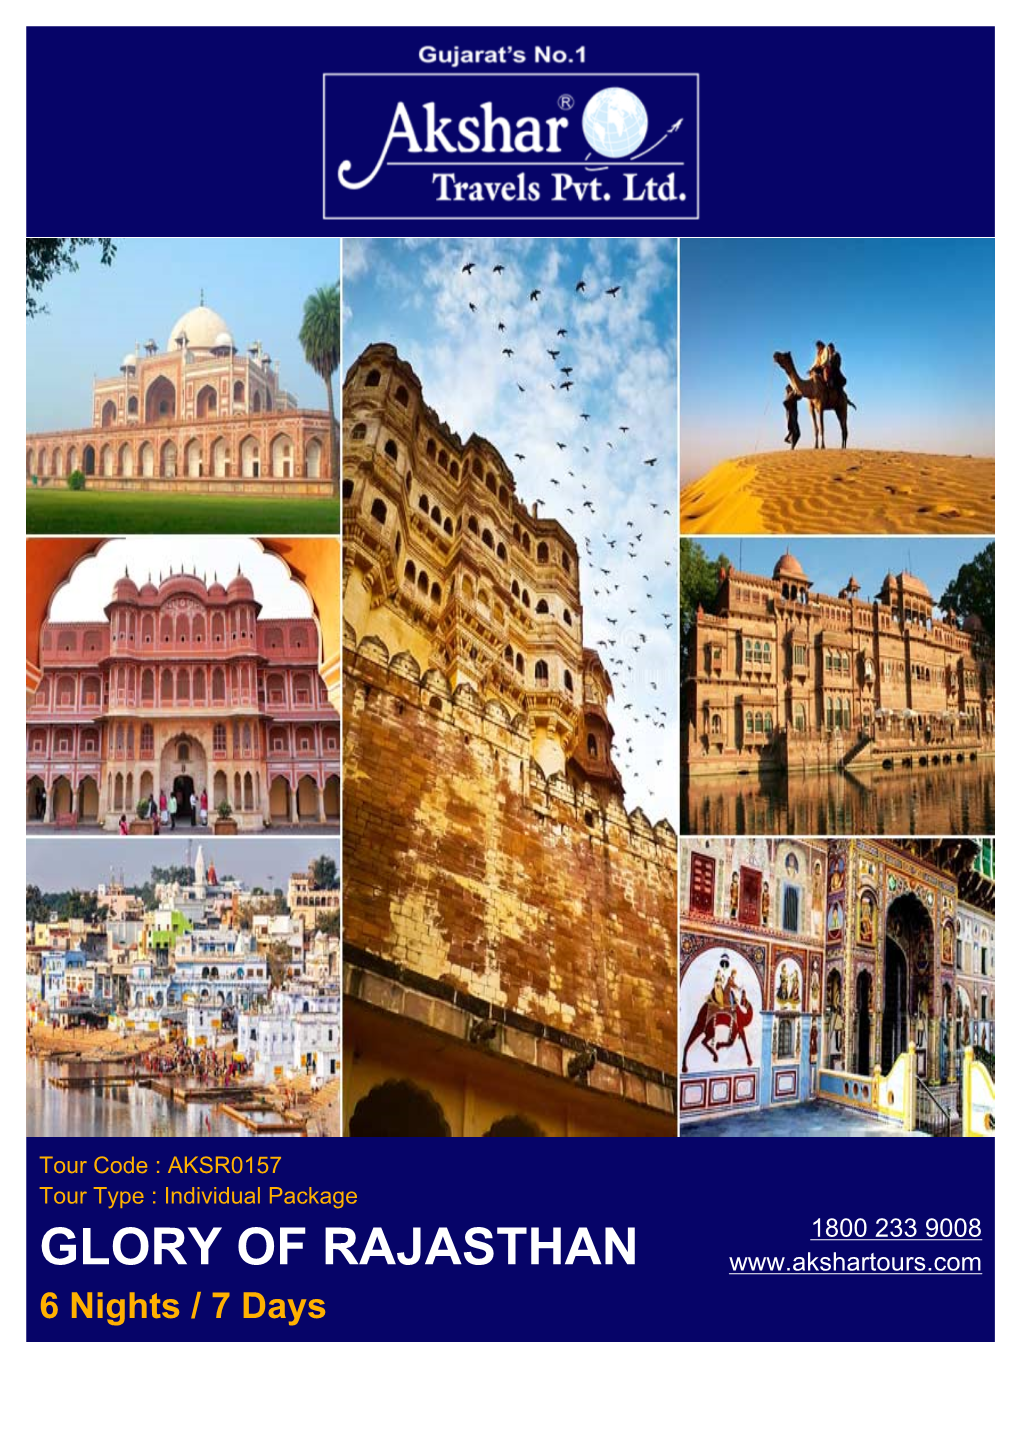 GLORY of RAJASTHAN 6 Nights / 7 Days PACKAGE OVERVIEW